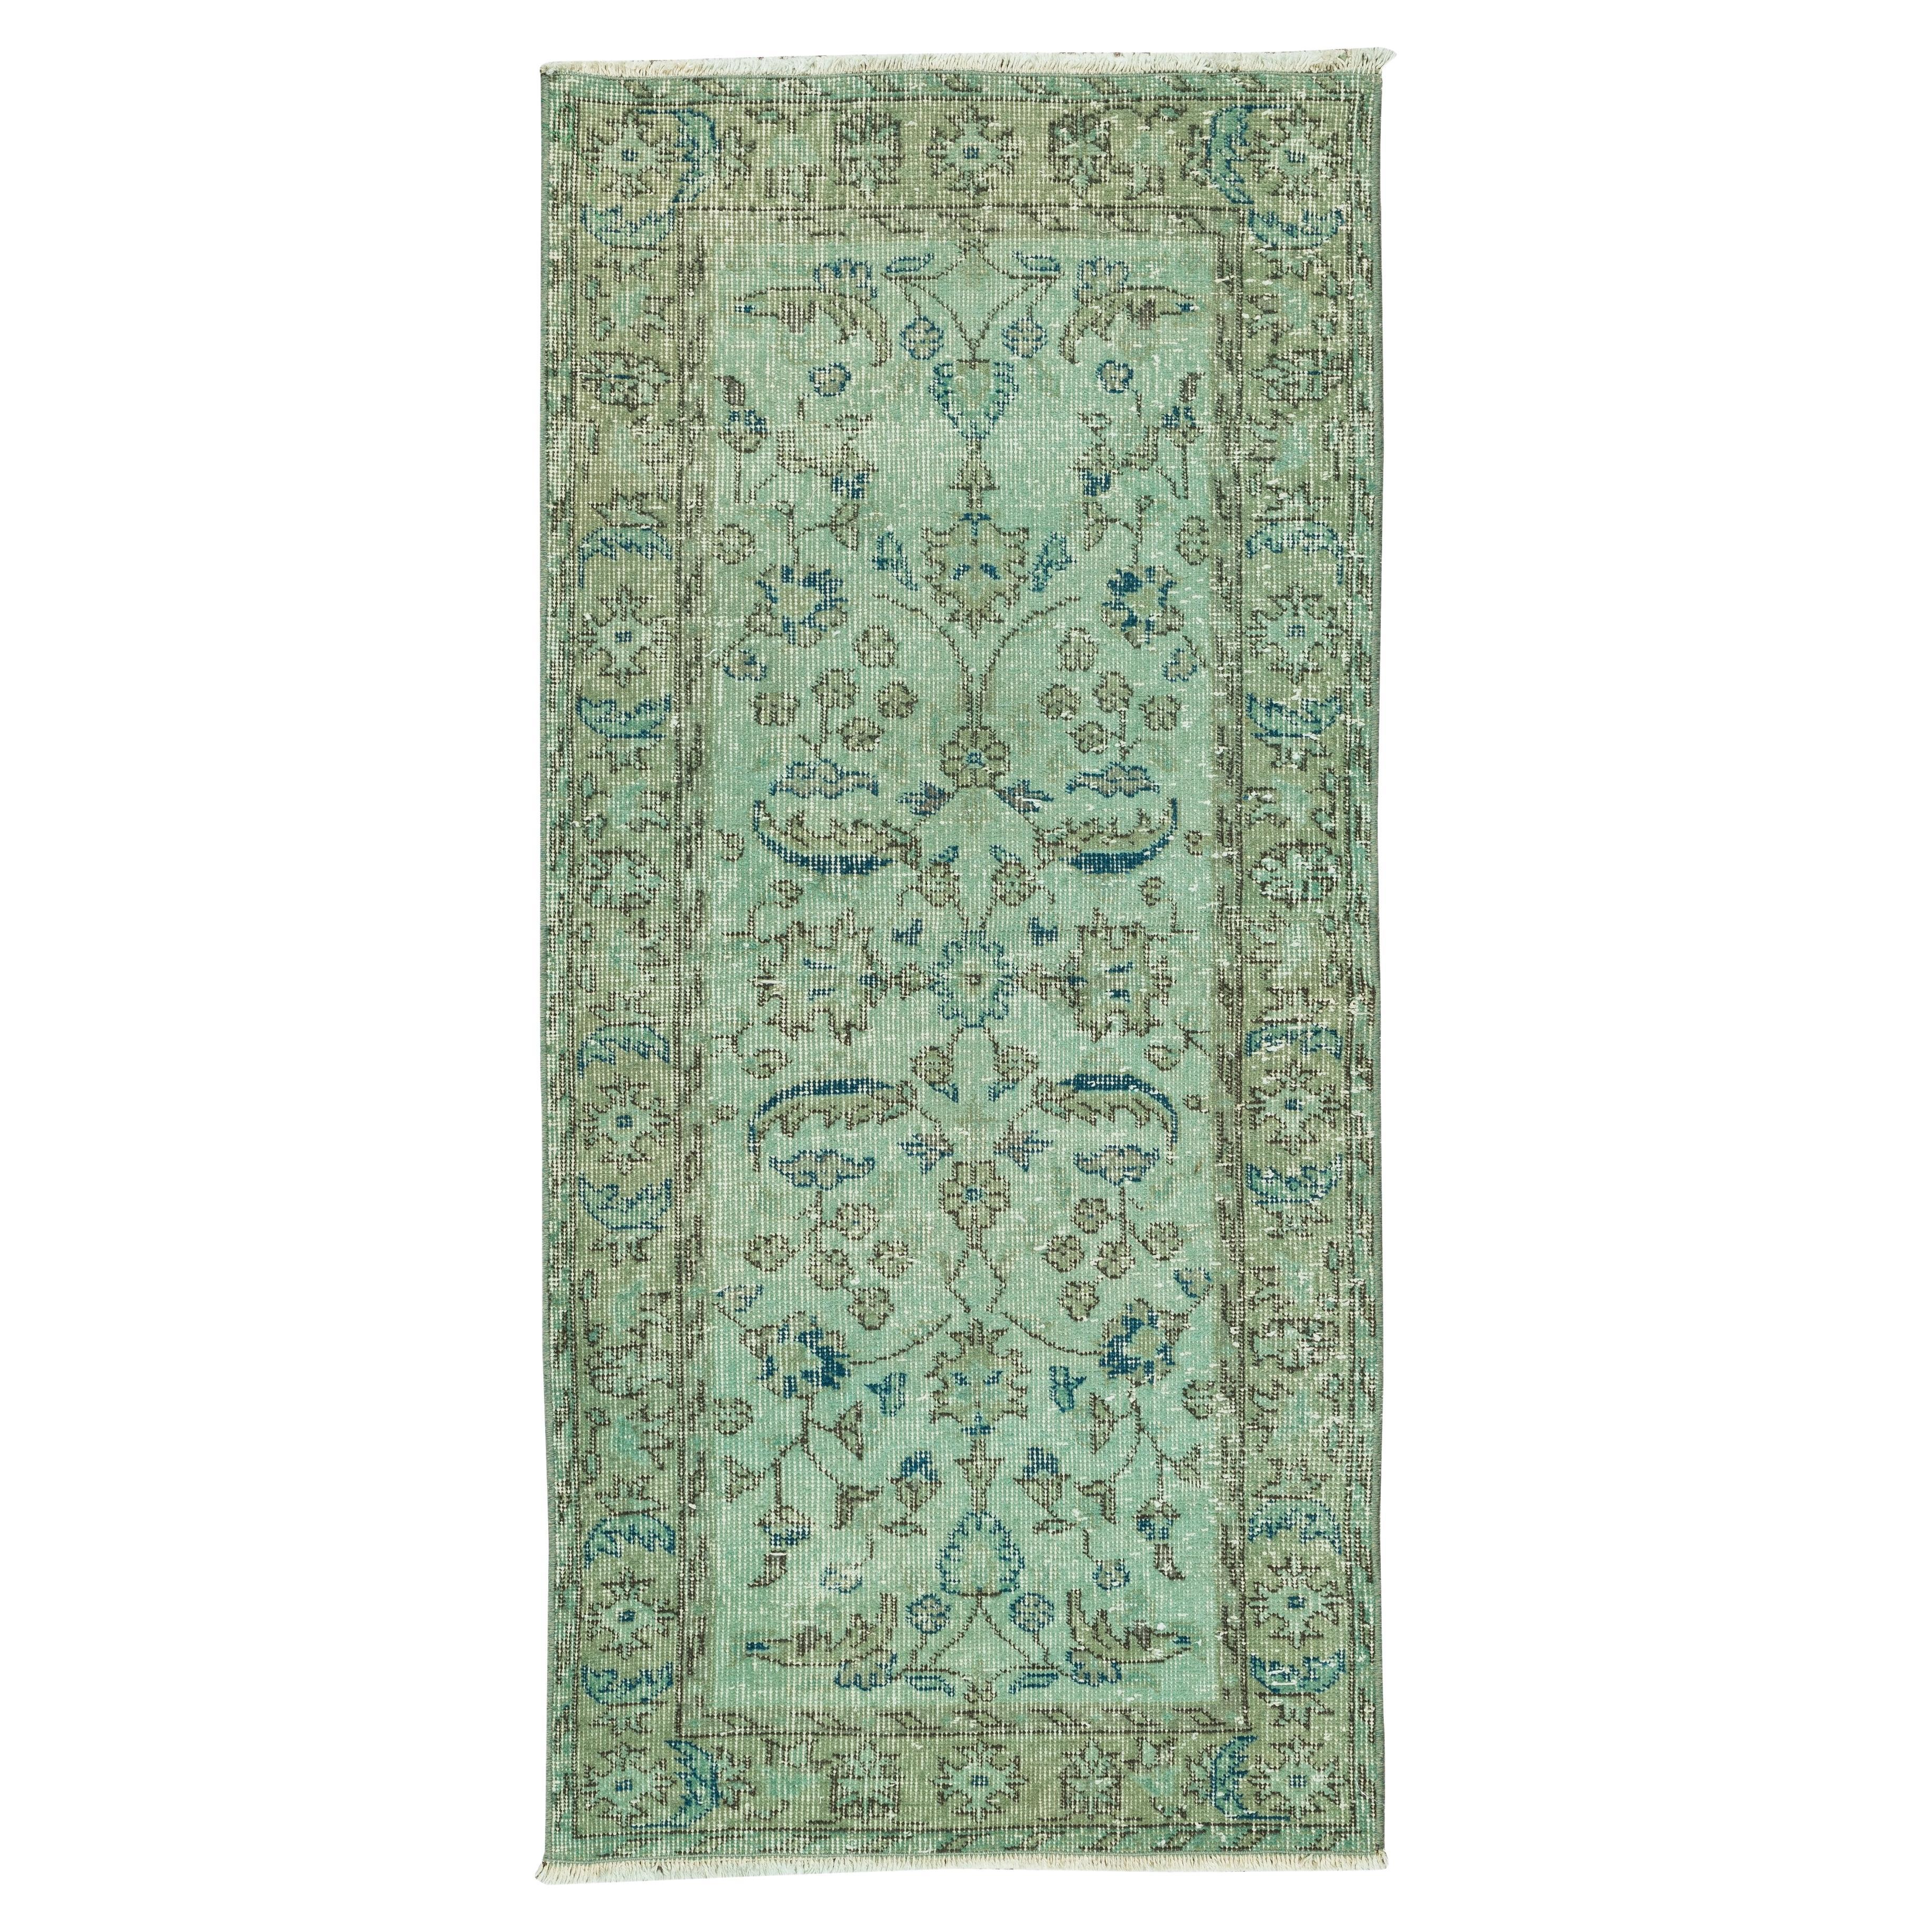 2.4x5 Ft Handmade Vintage Turkish Accent Rug Re-Dyed in Green 4 Modern Interiors